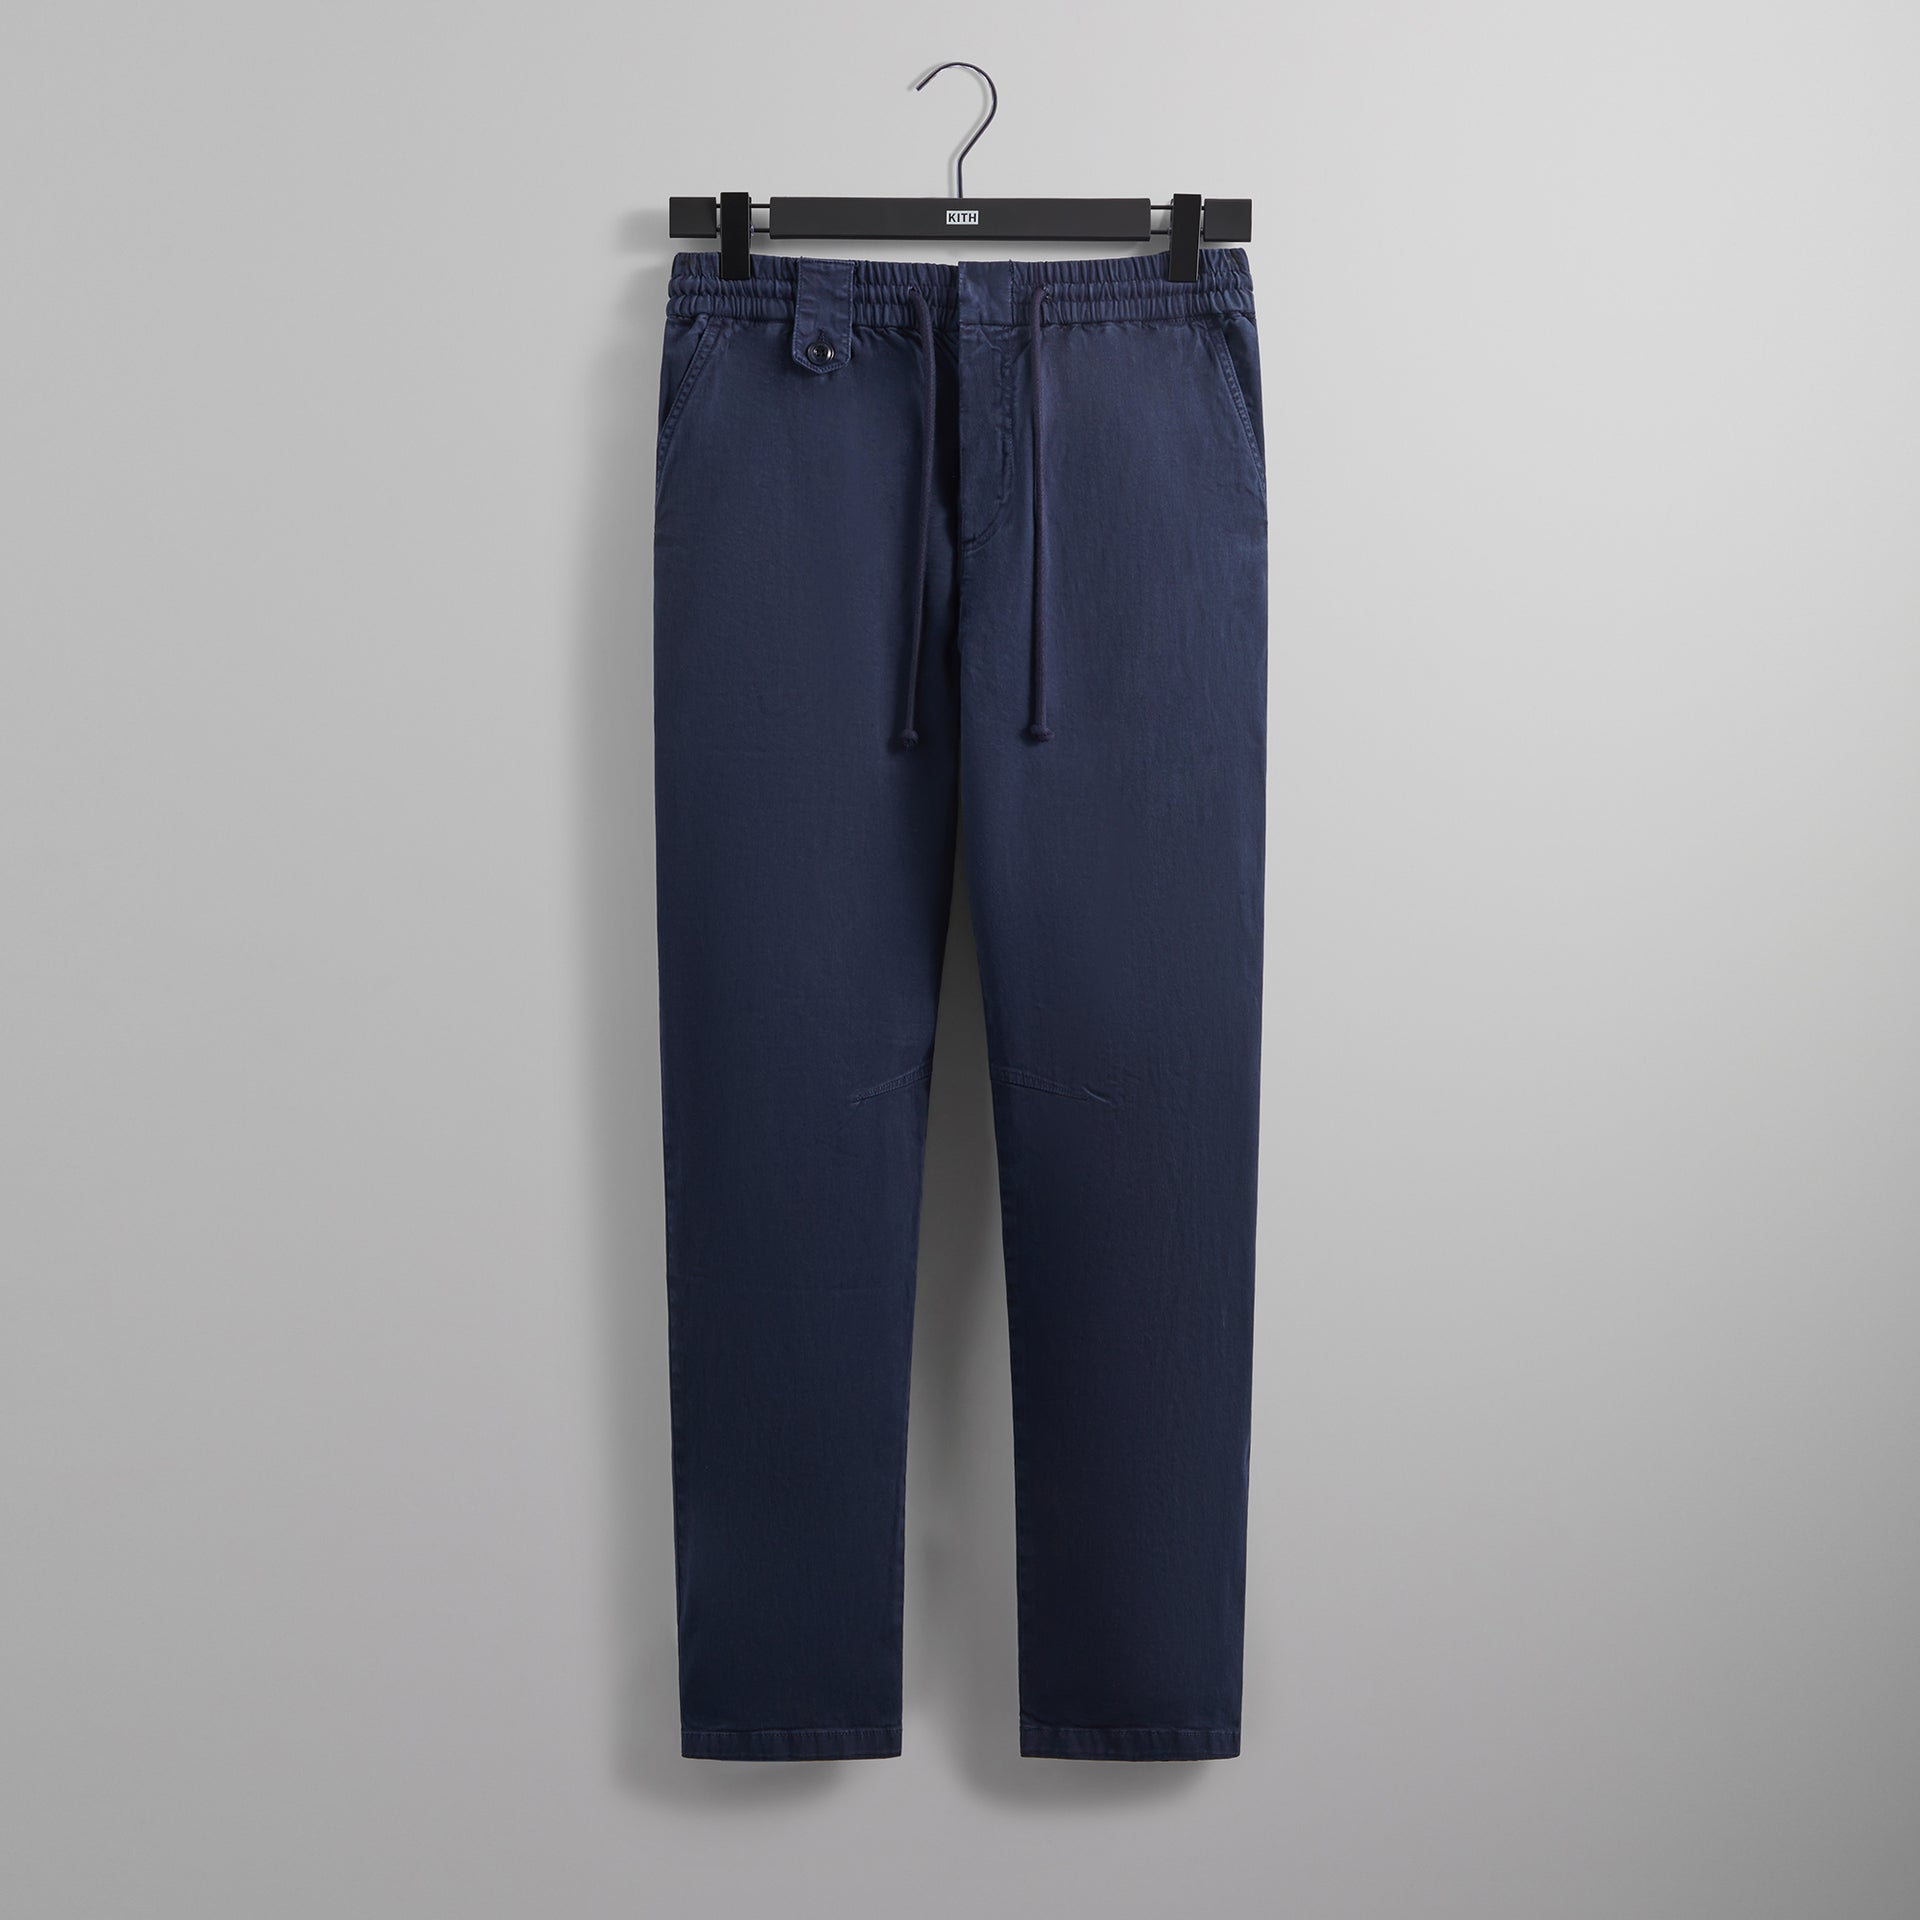 Erlebniswelt-fliegenfischenShops Washed Cotton Wallace Pant - Nocturnal